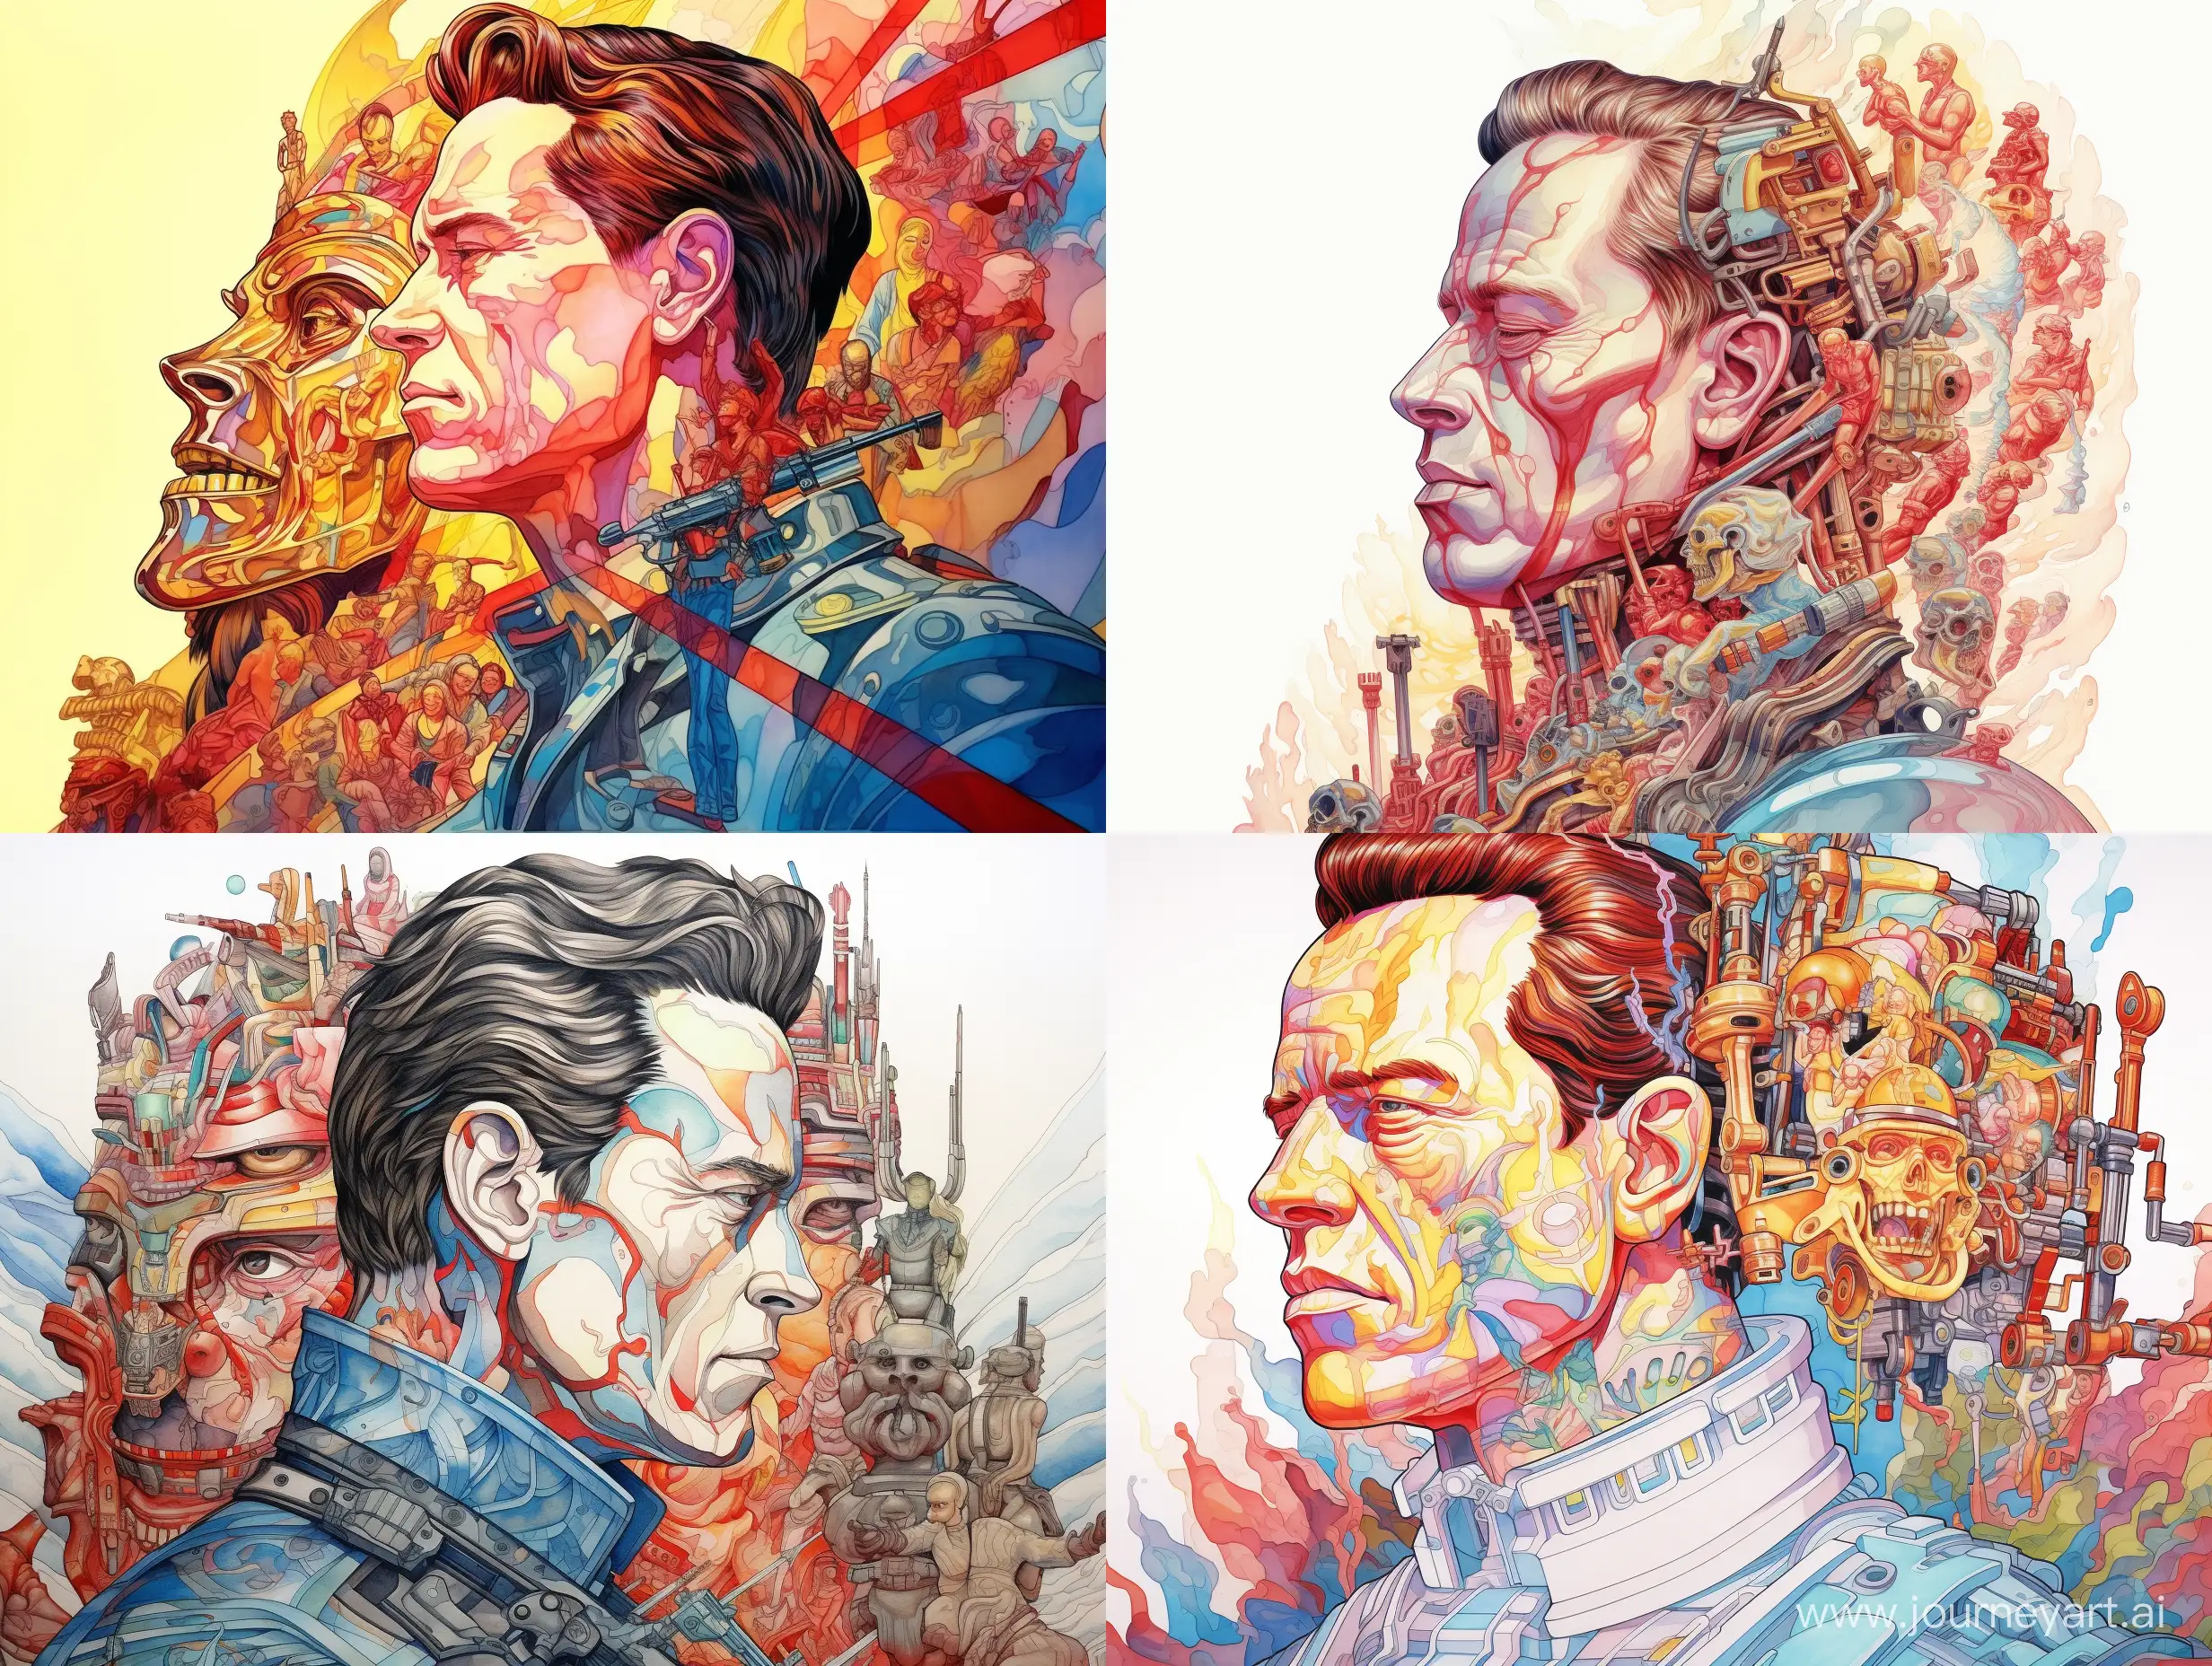 Portrait of actor Arnold Schwarzenegger as the terminator, in profile, with a crown on his head, against the background of characters from films, on a white background, caricature, watercolor, in detail, impressionism style, Victo Ngai